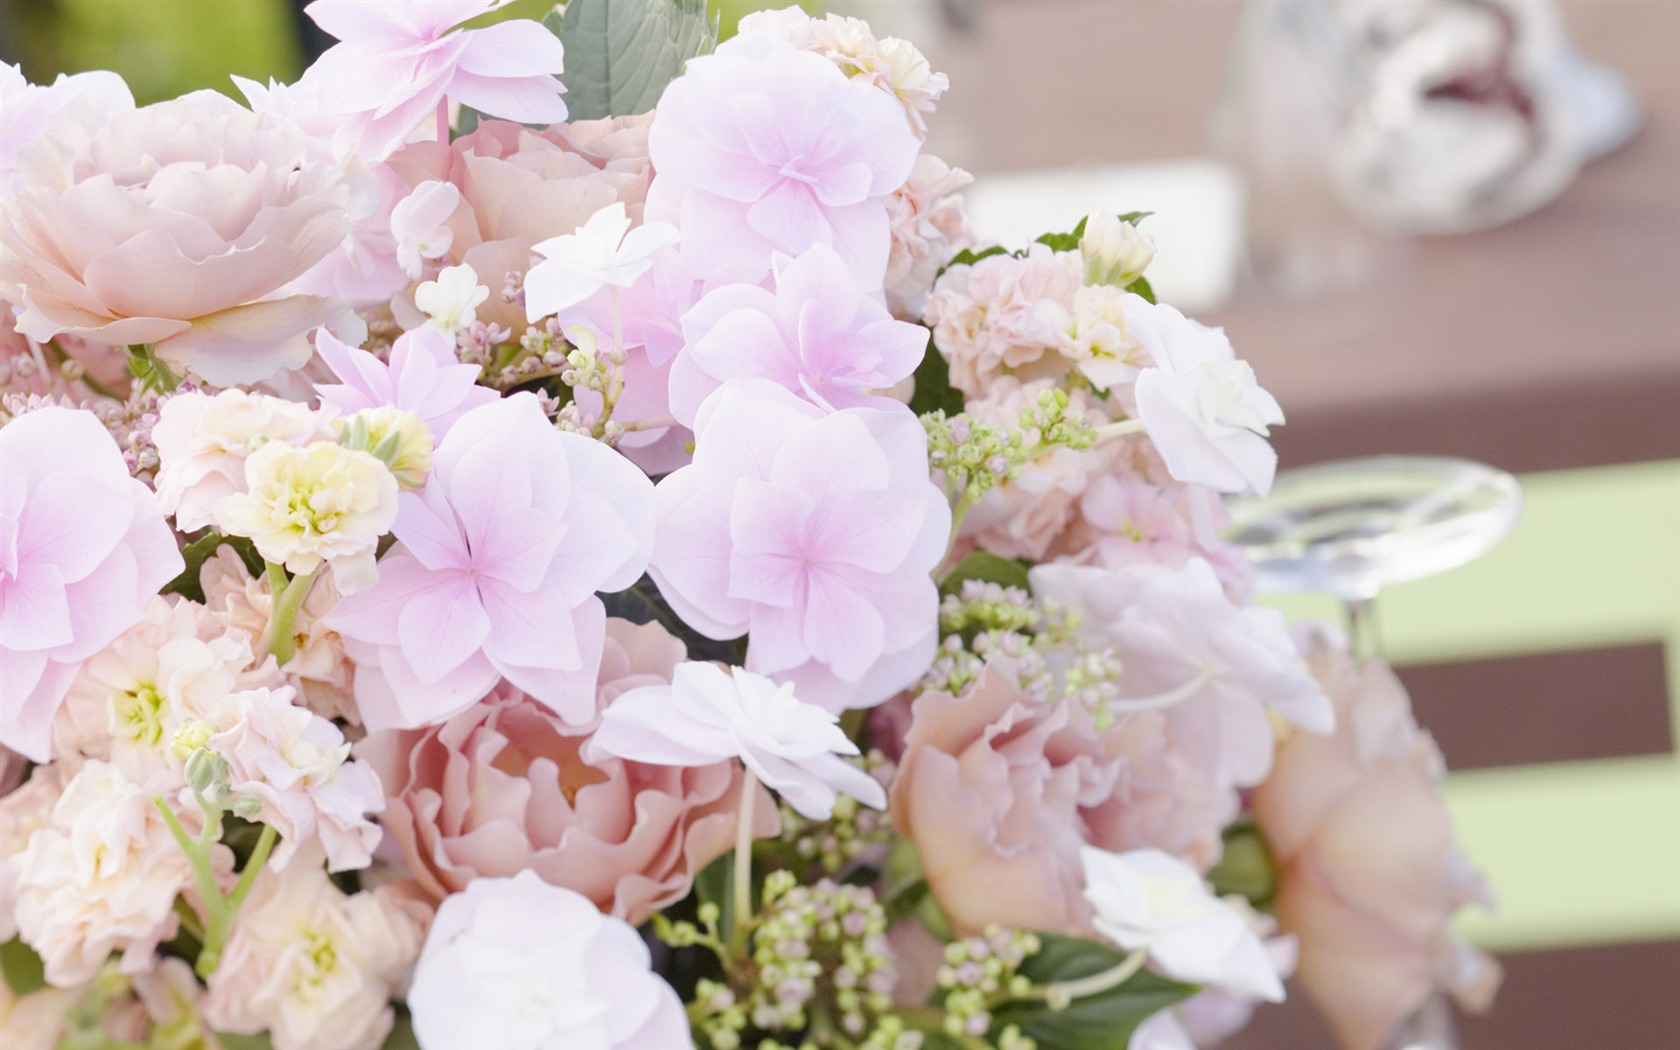 Weddings and Flowers wallpaper (2) #4 - 1680x1050